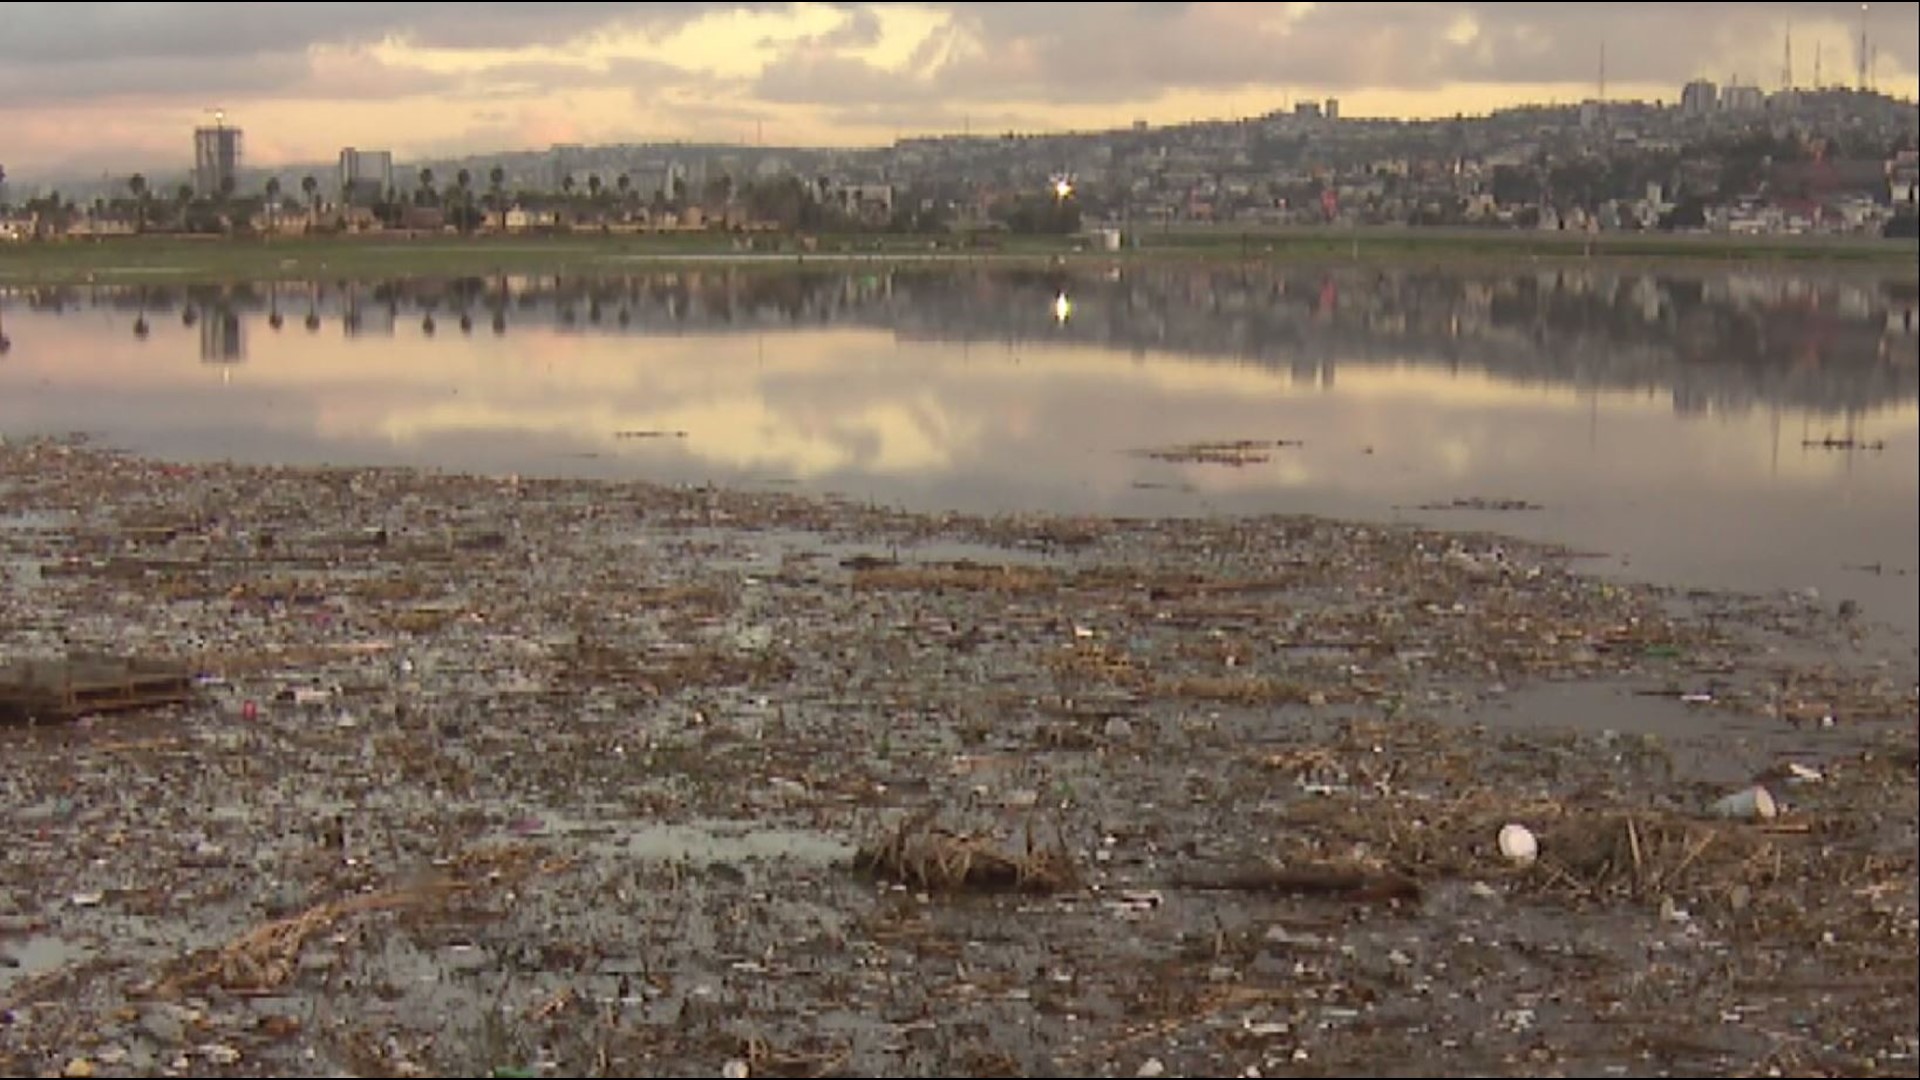 Tons of sewage and trash flooded into the Tijuana River Valley covering a sod farm.